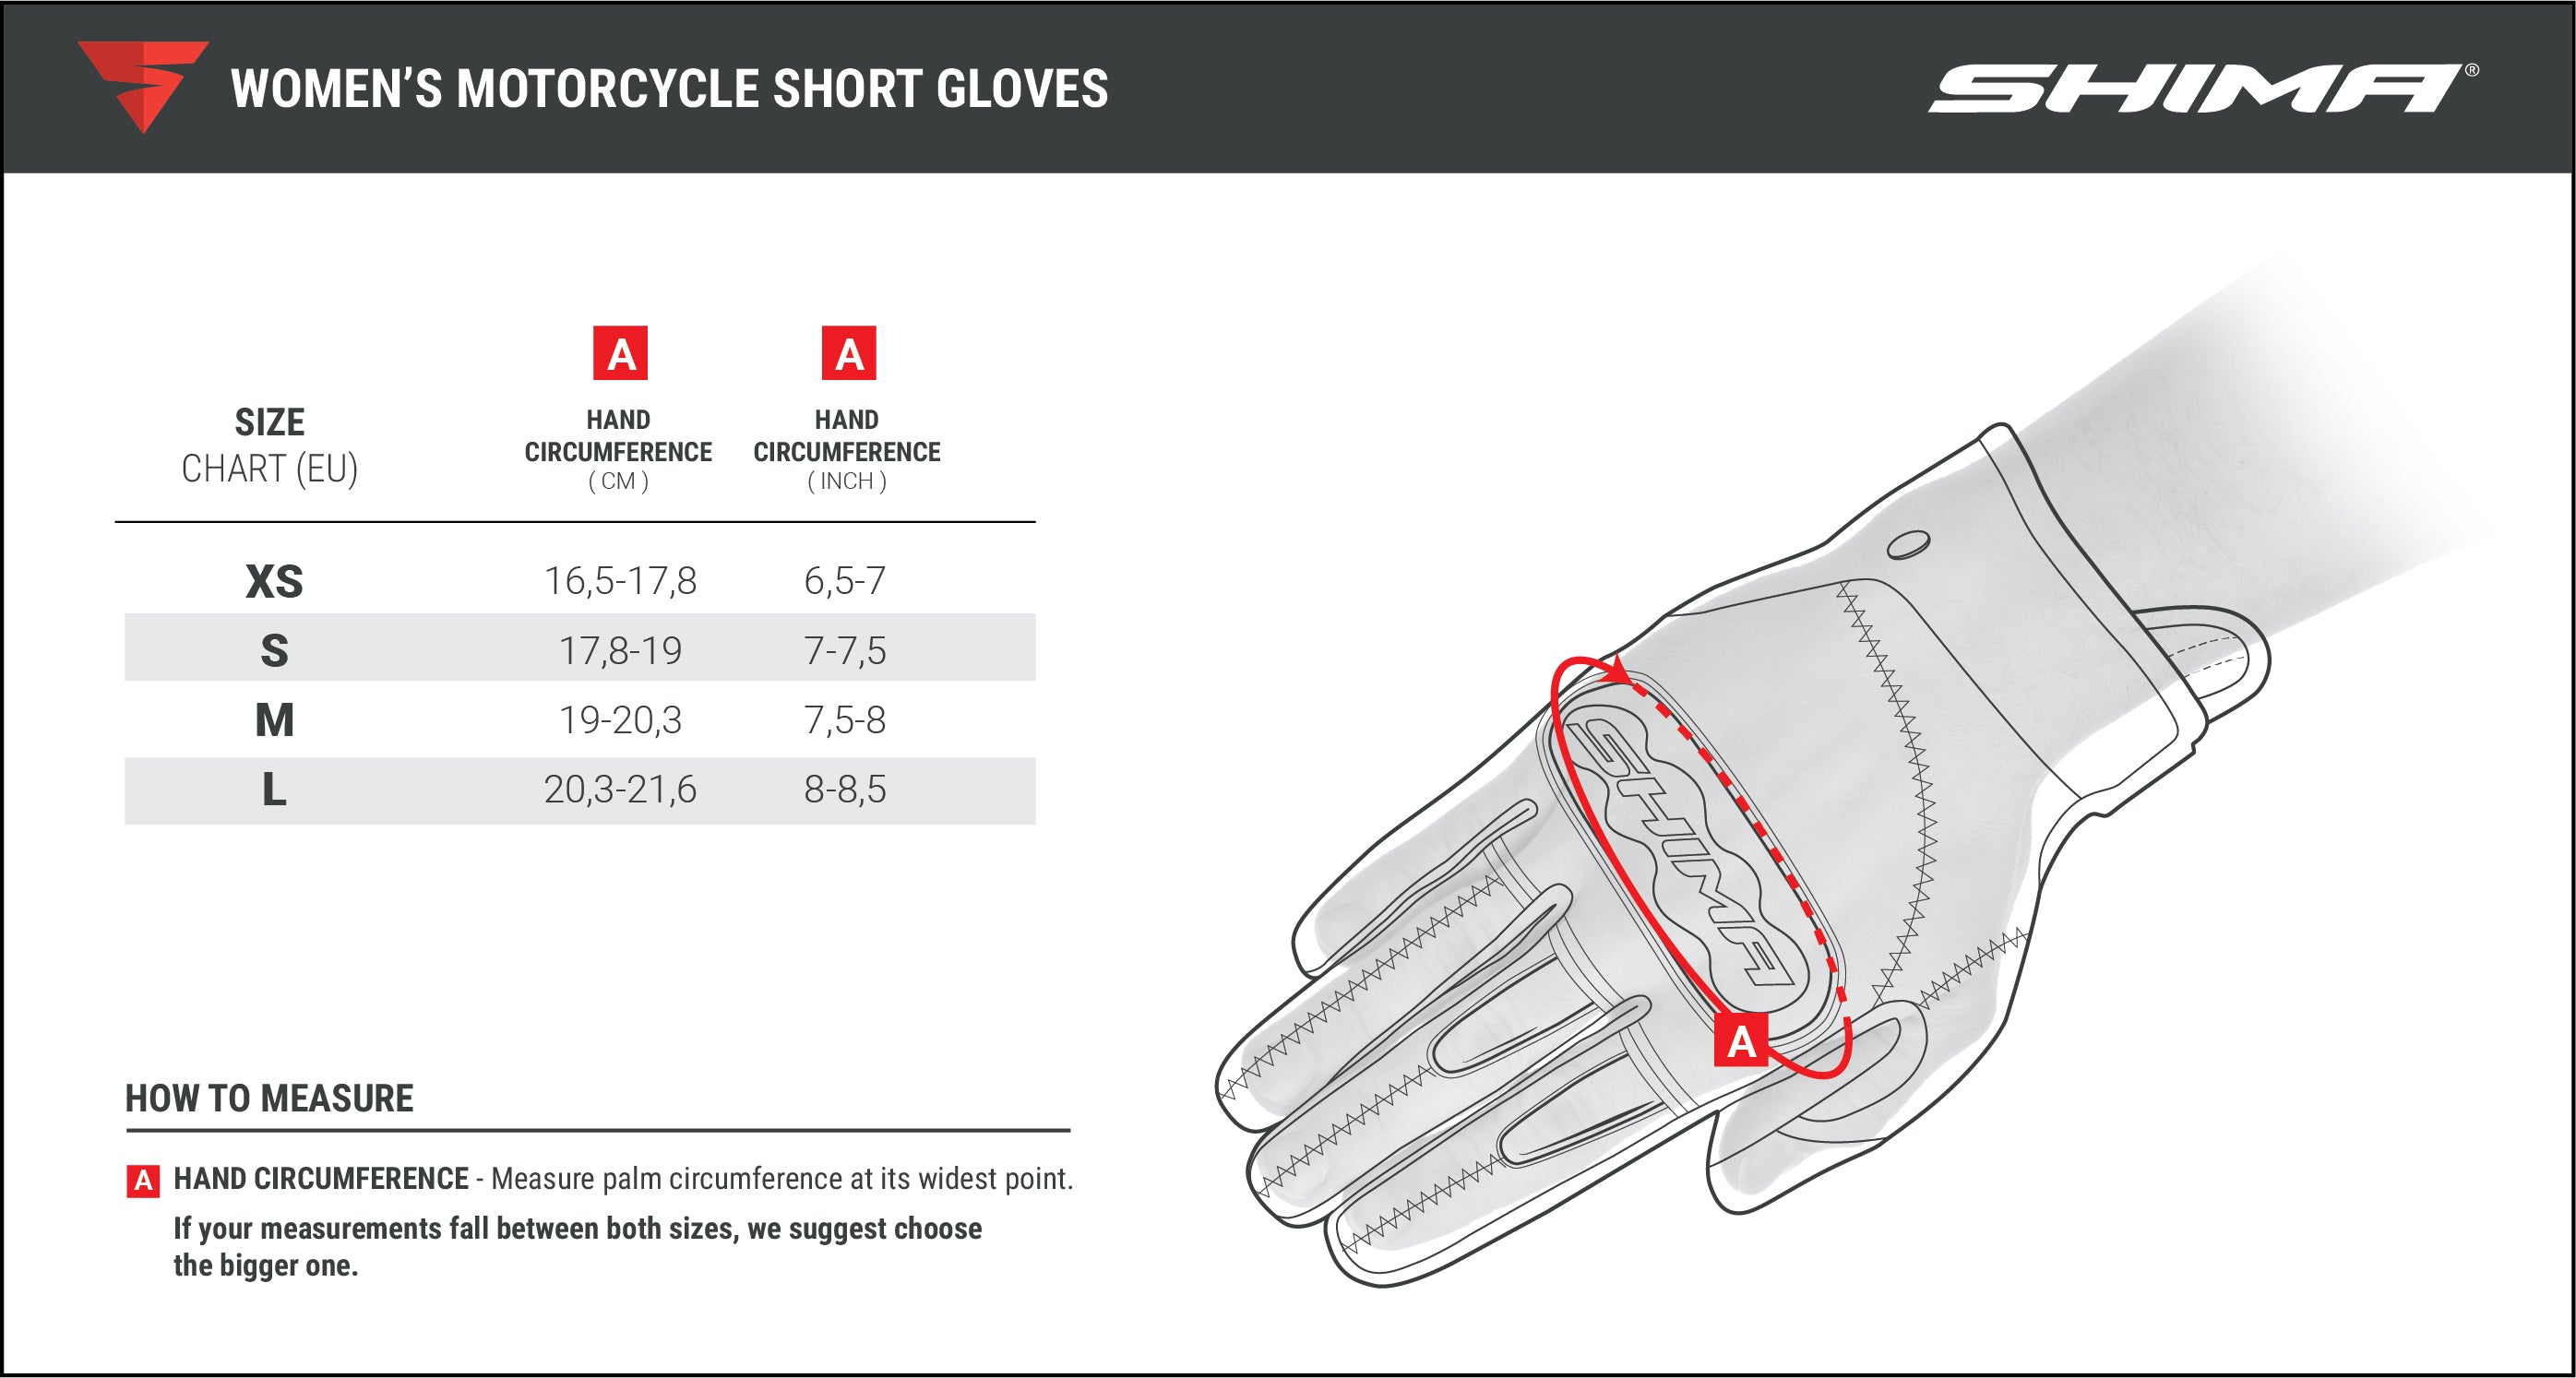 Sie chart of women's short motorcycle gloves from Shima